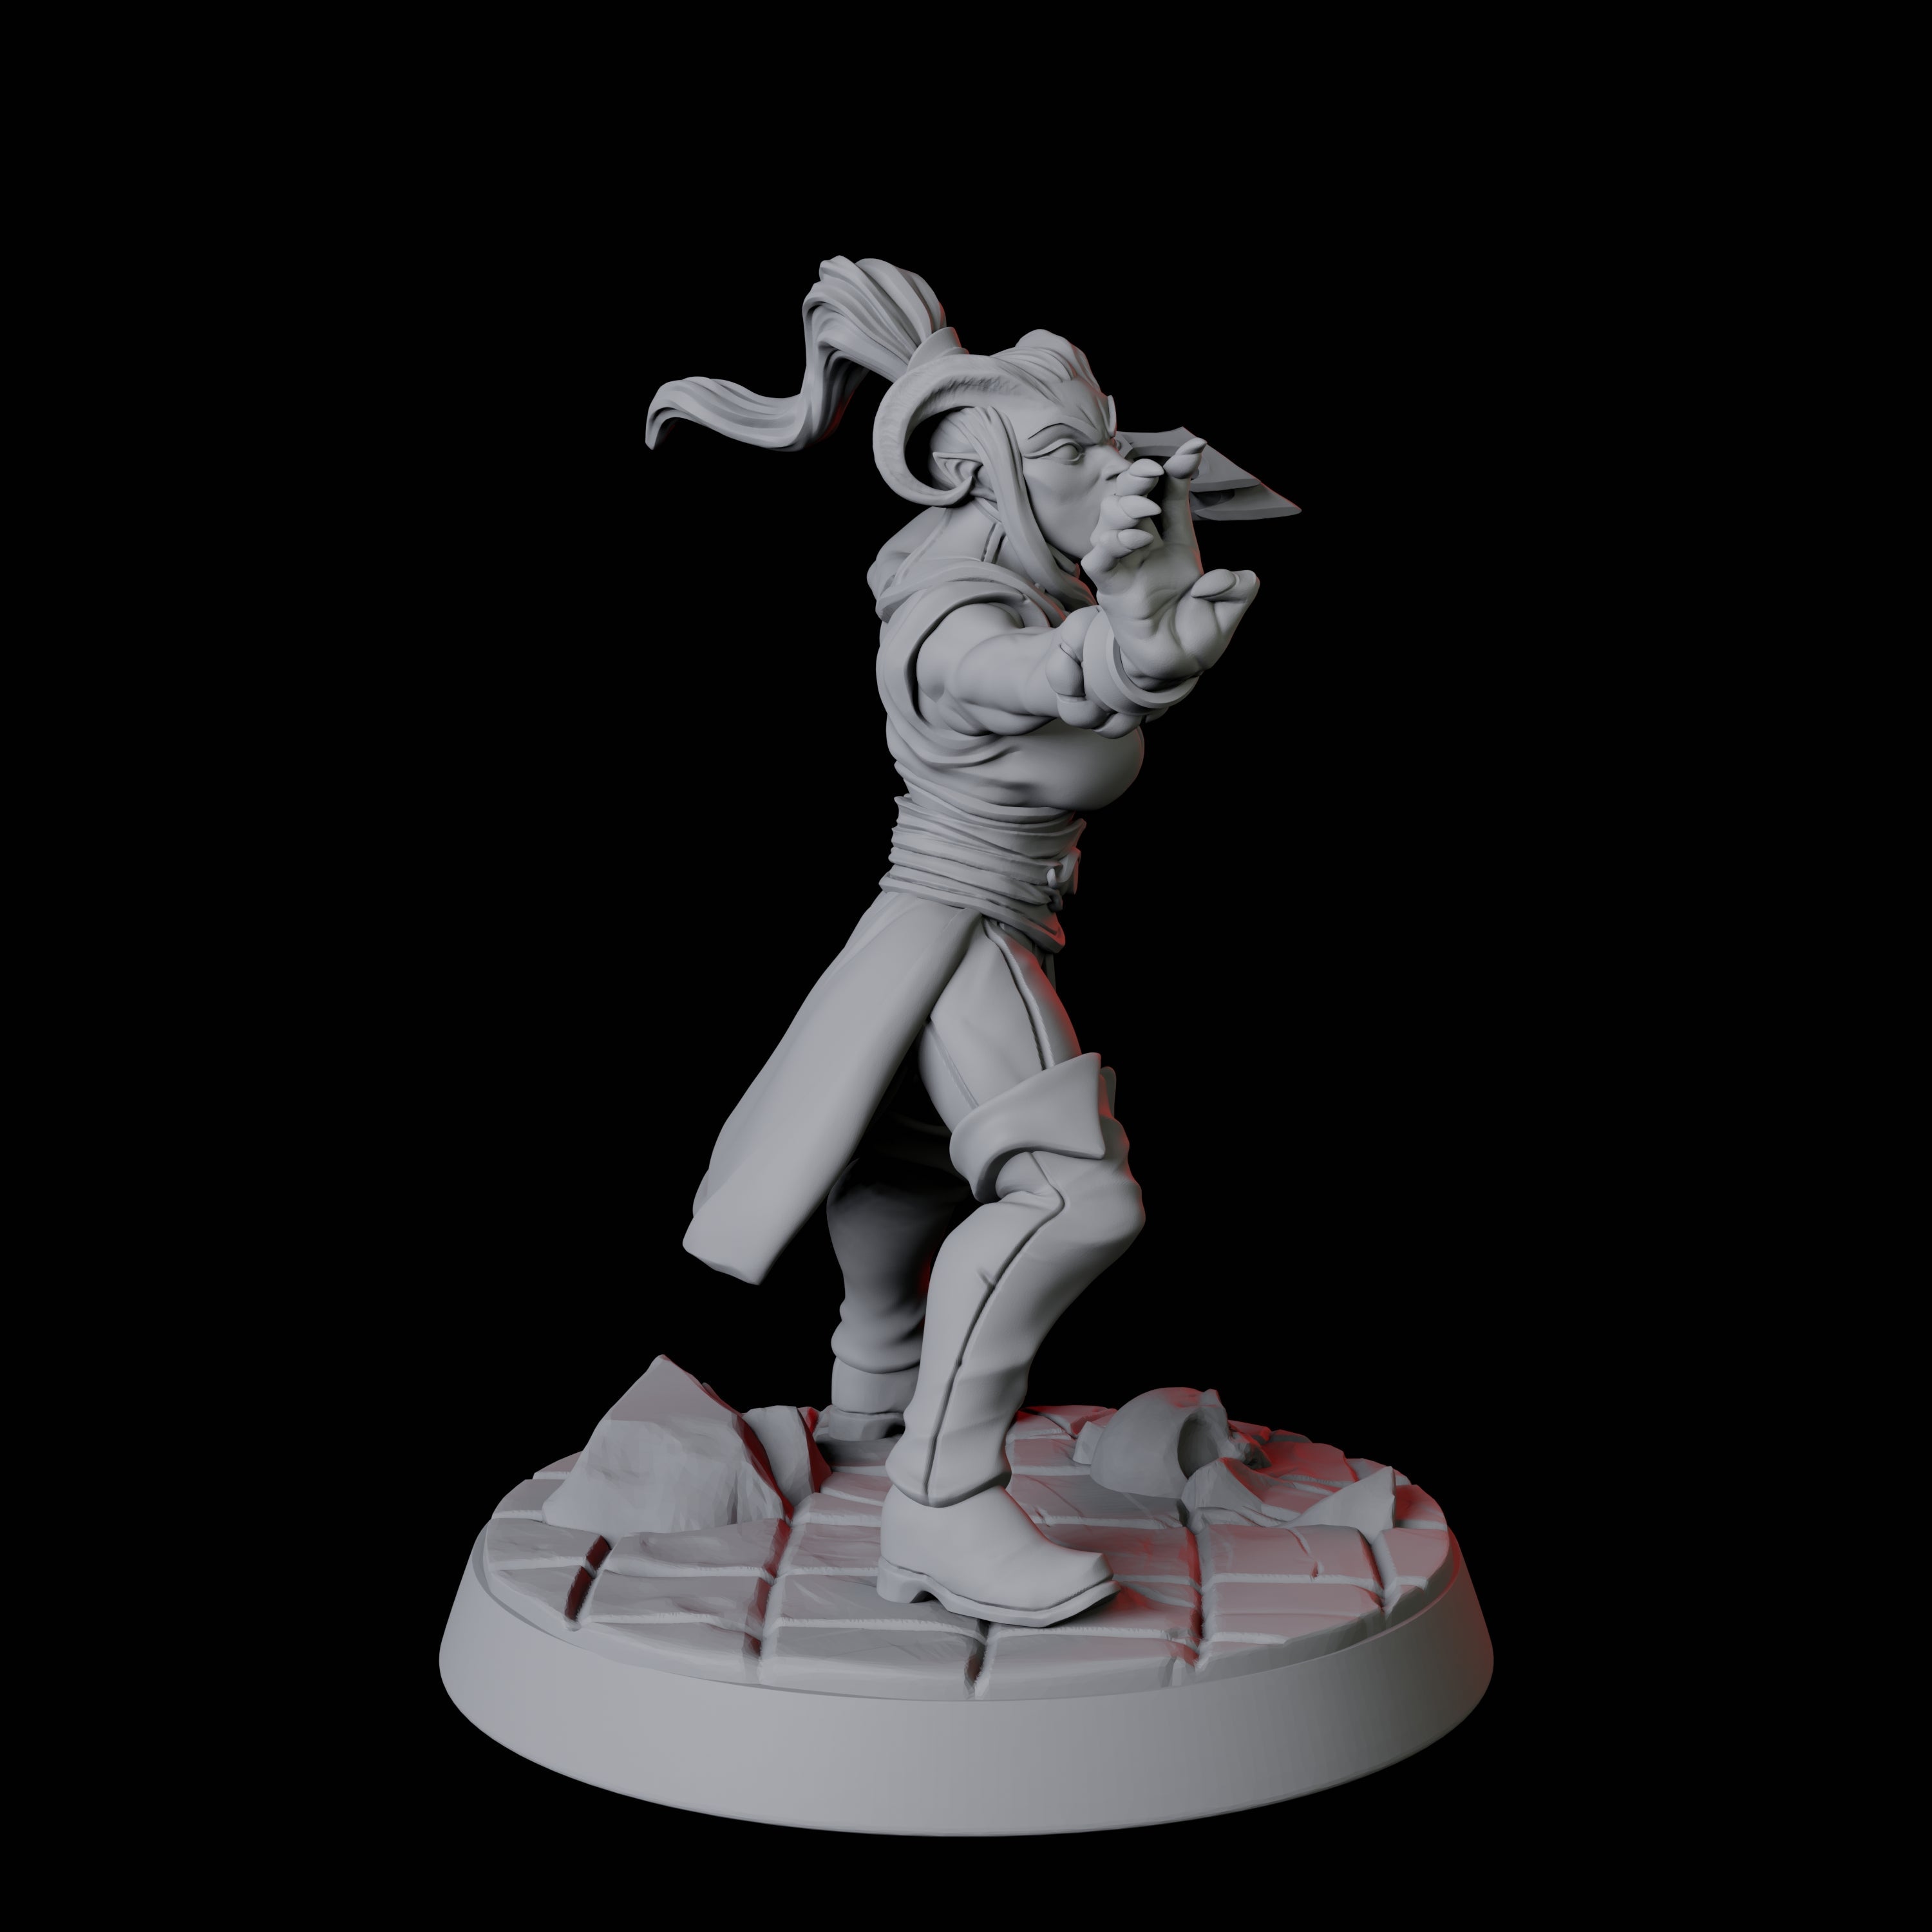 Tiefling Monk F Miniature for Dungeons and Dragons, Pathfinder or other TTRPGs